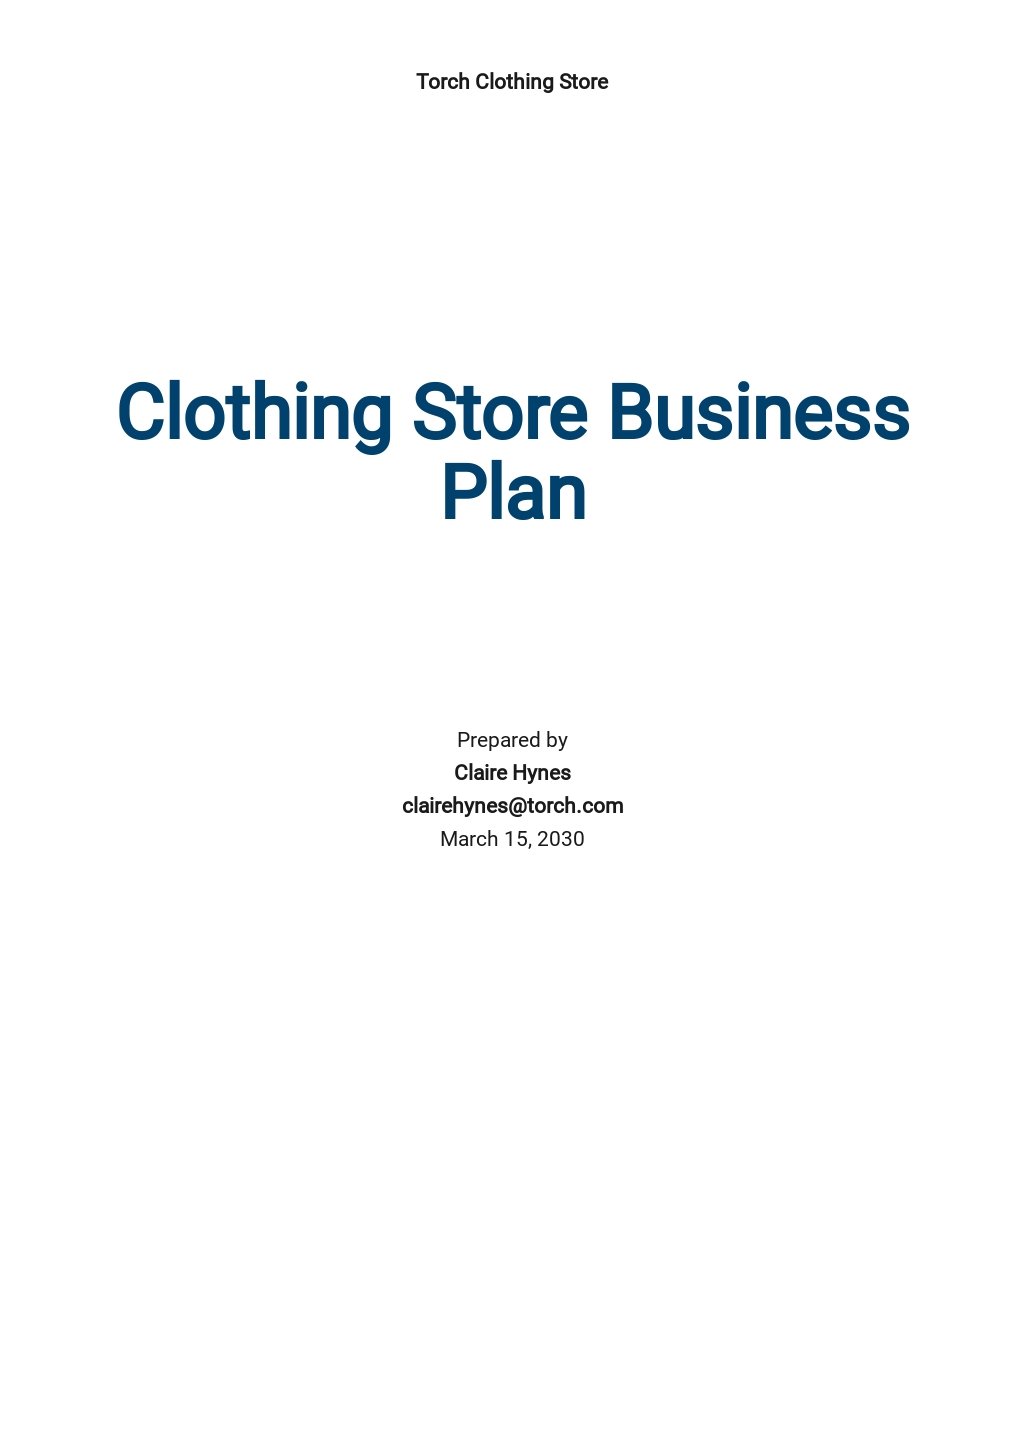 business plan for a clothing business